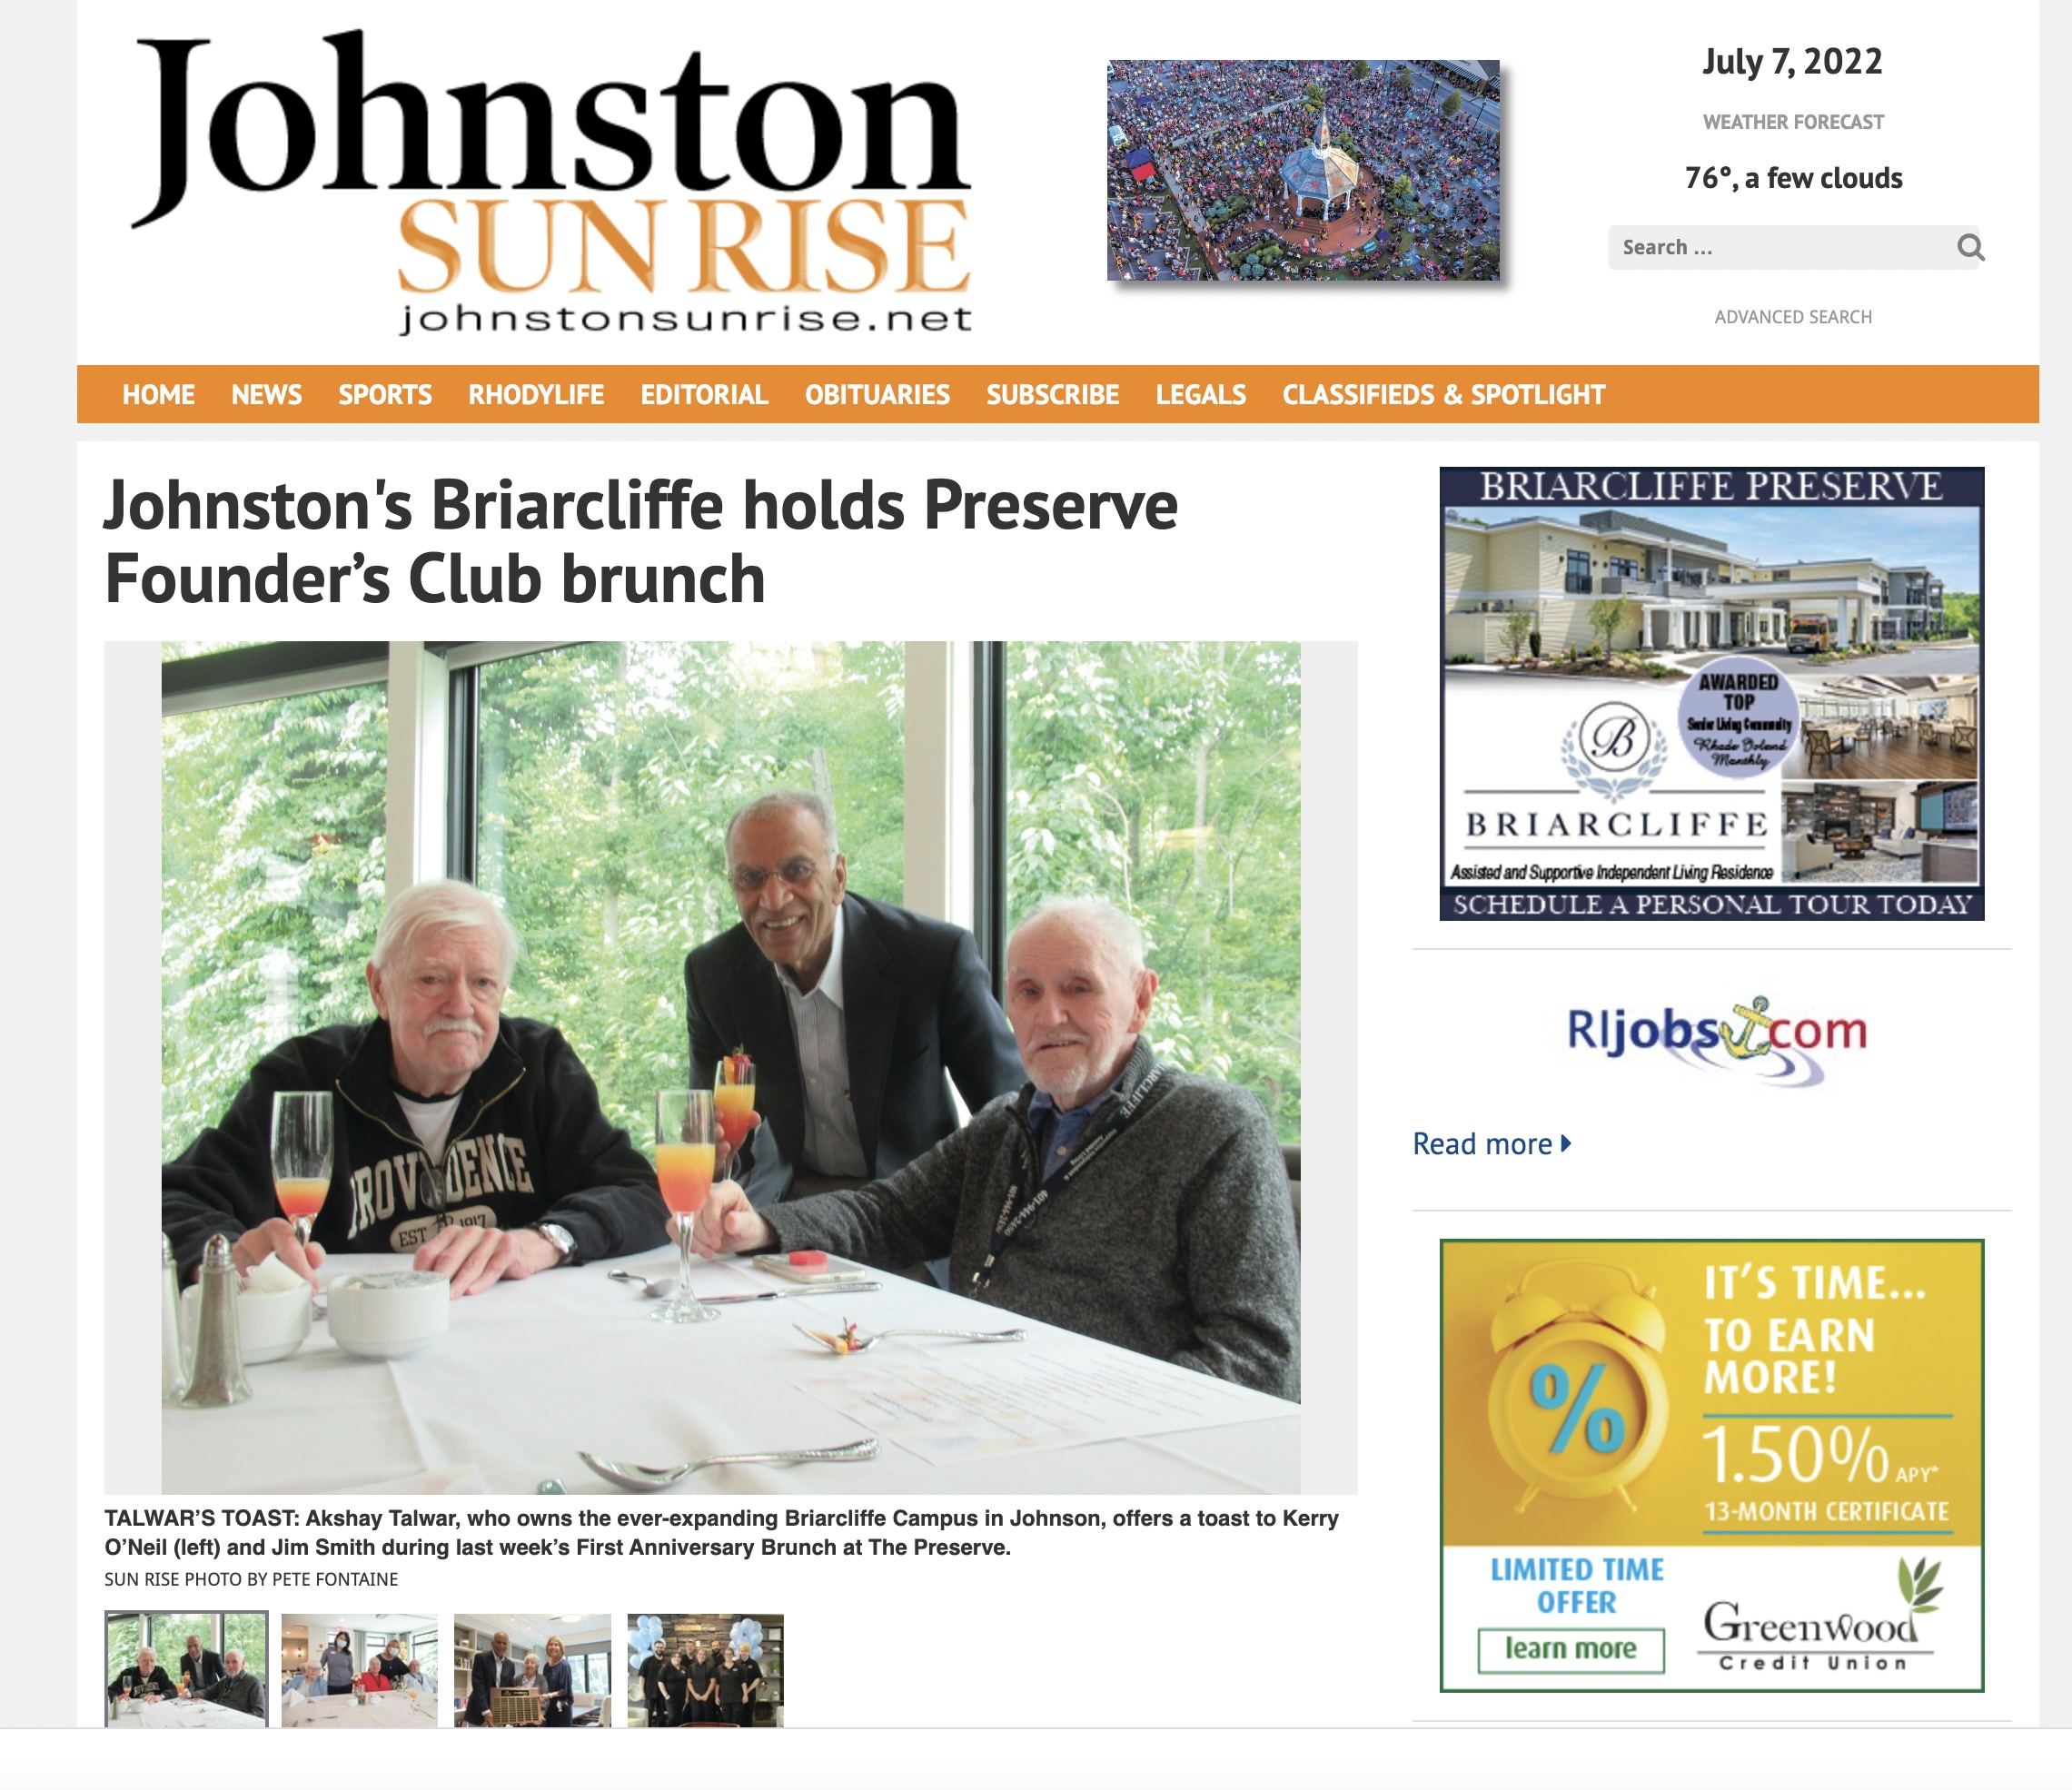 Briarcliffe Preserve Founders Club Brunch Celebrating 1 Year Anniversary